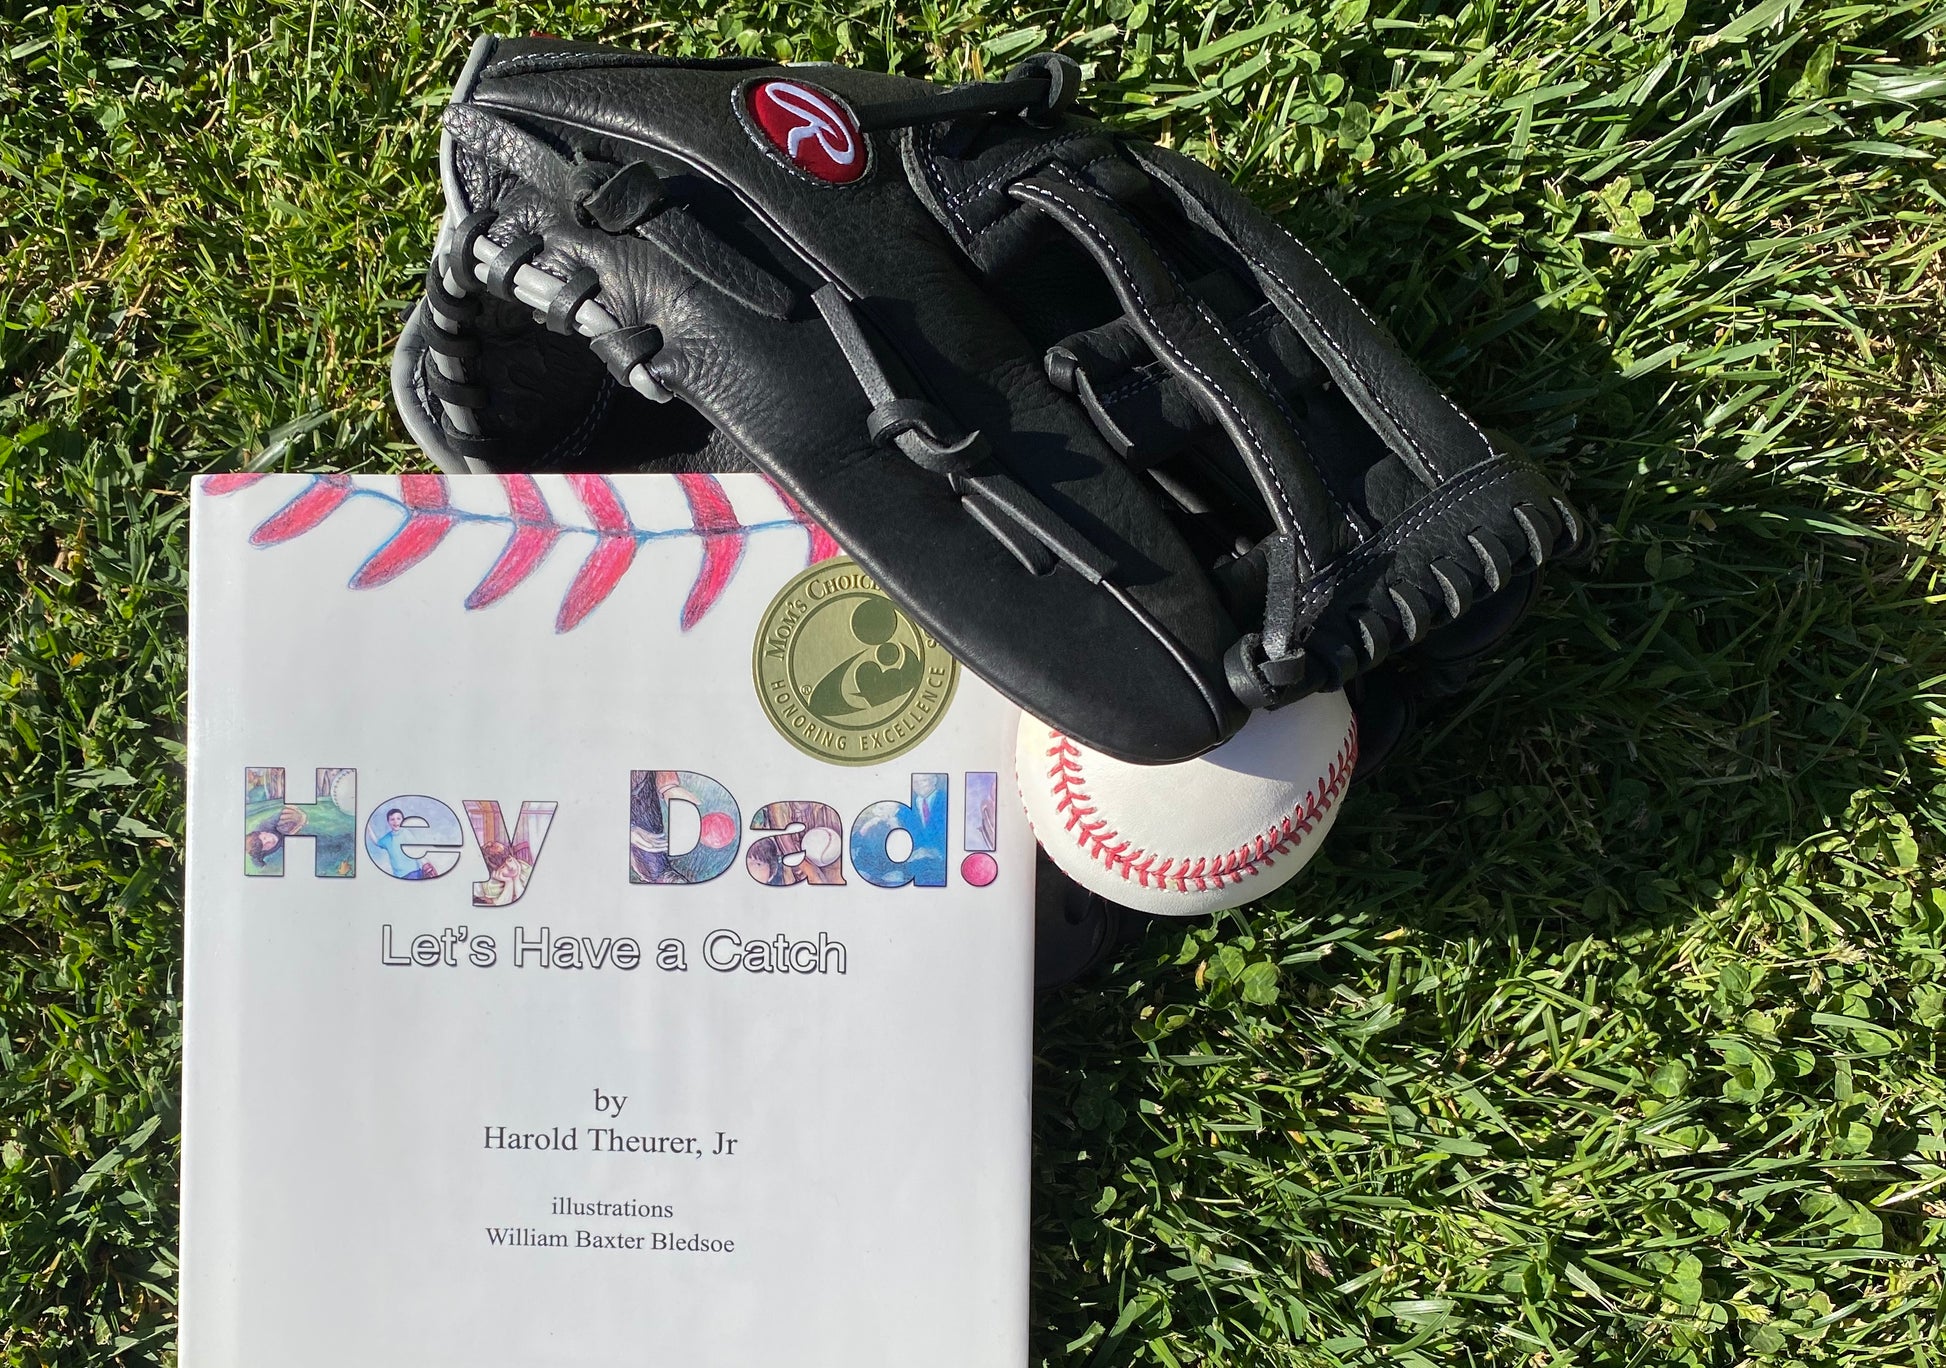 Photo of the book, with a black baseball glvoe and baseball.  The book's cover says Hey Dad! in large print.  In smaller print is "Let's have a Catch" by Harold Theurer Jr. Illustraions by William Baxter Bledsoe.